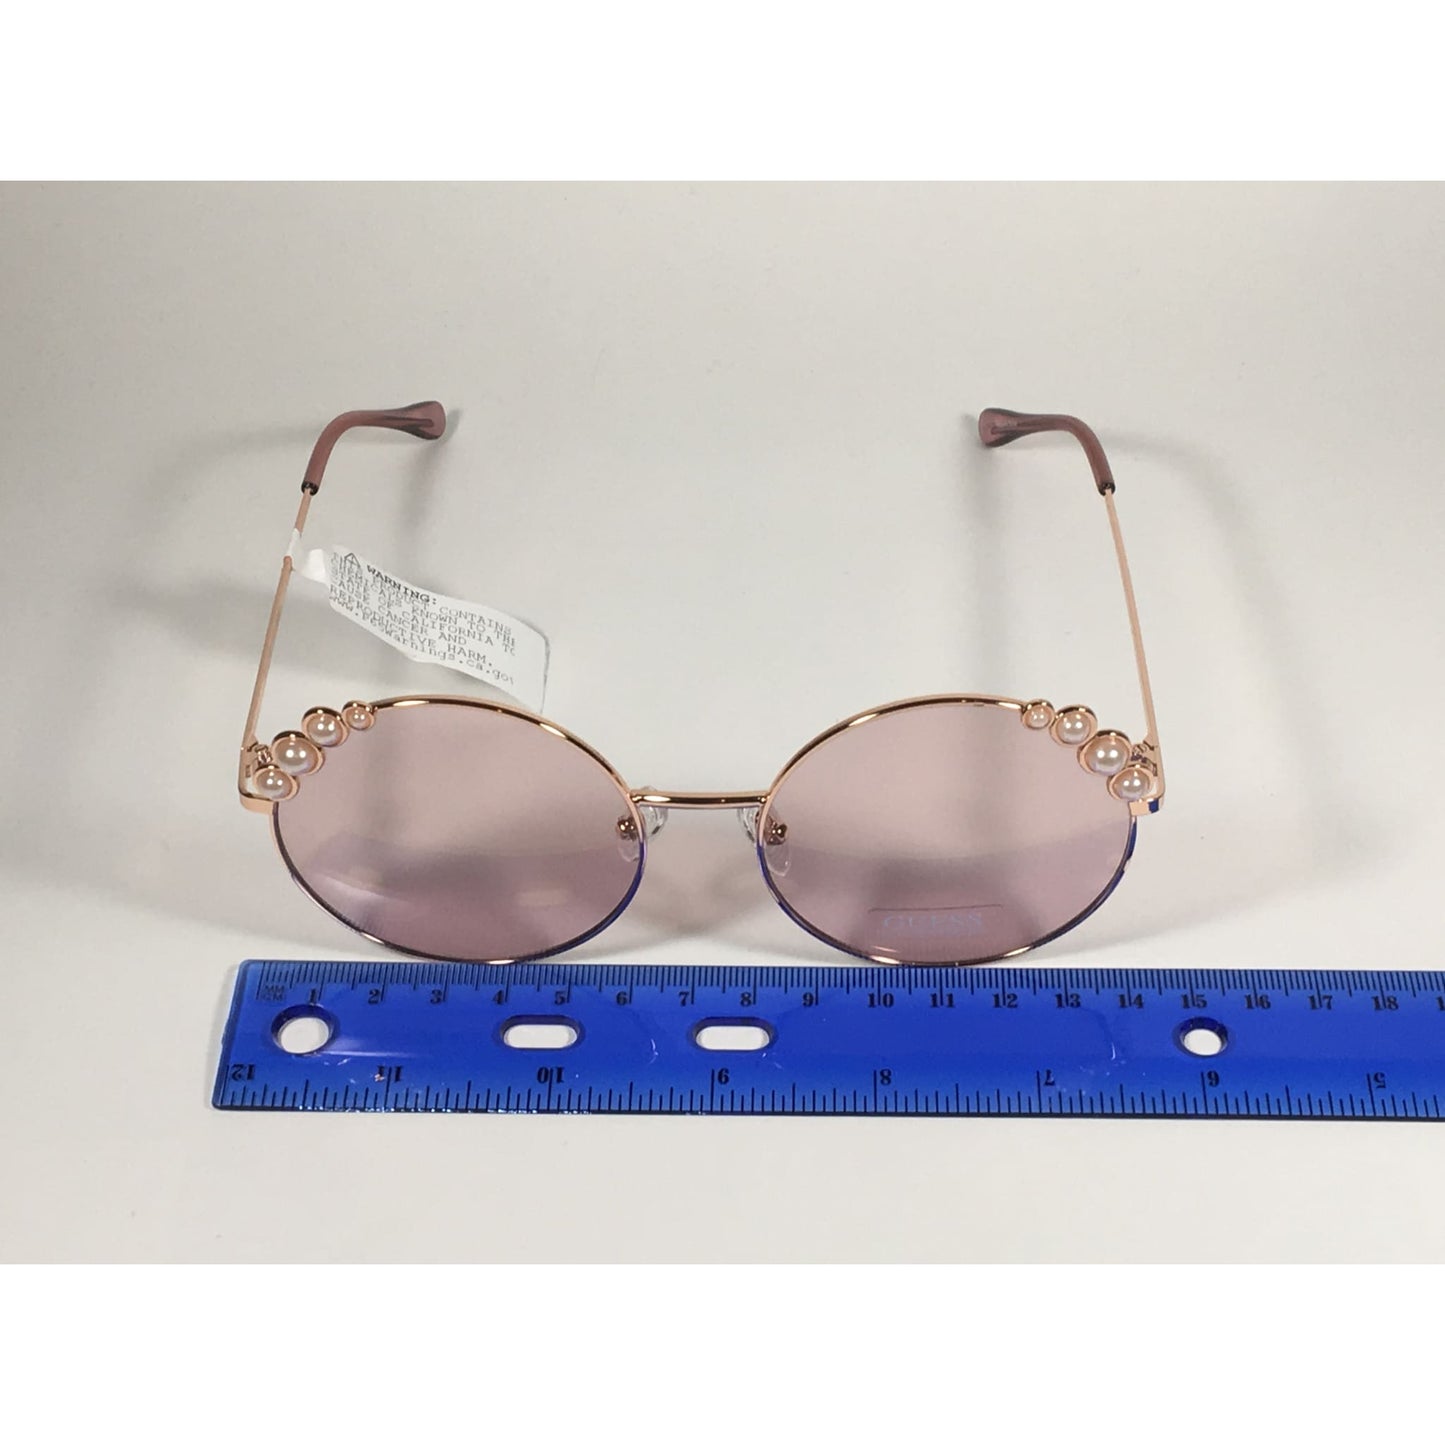 Guess Round Pearl Sunglasses Rose Gold Metal Frame Pink Lens GF0355 28T - Sunglasses